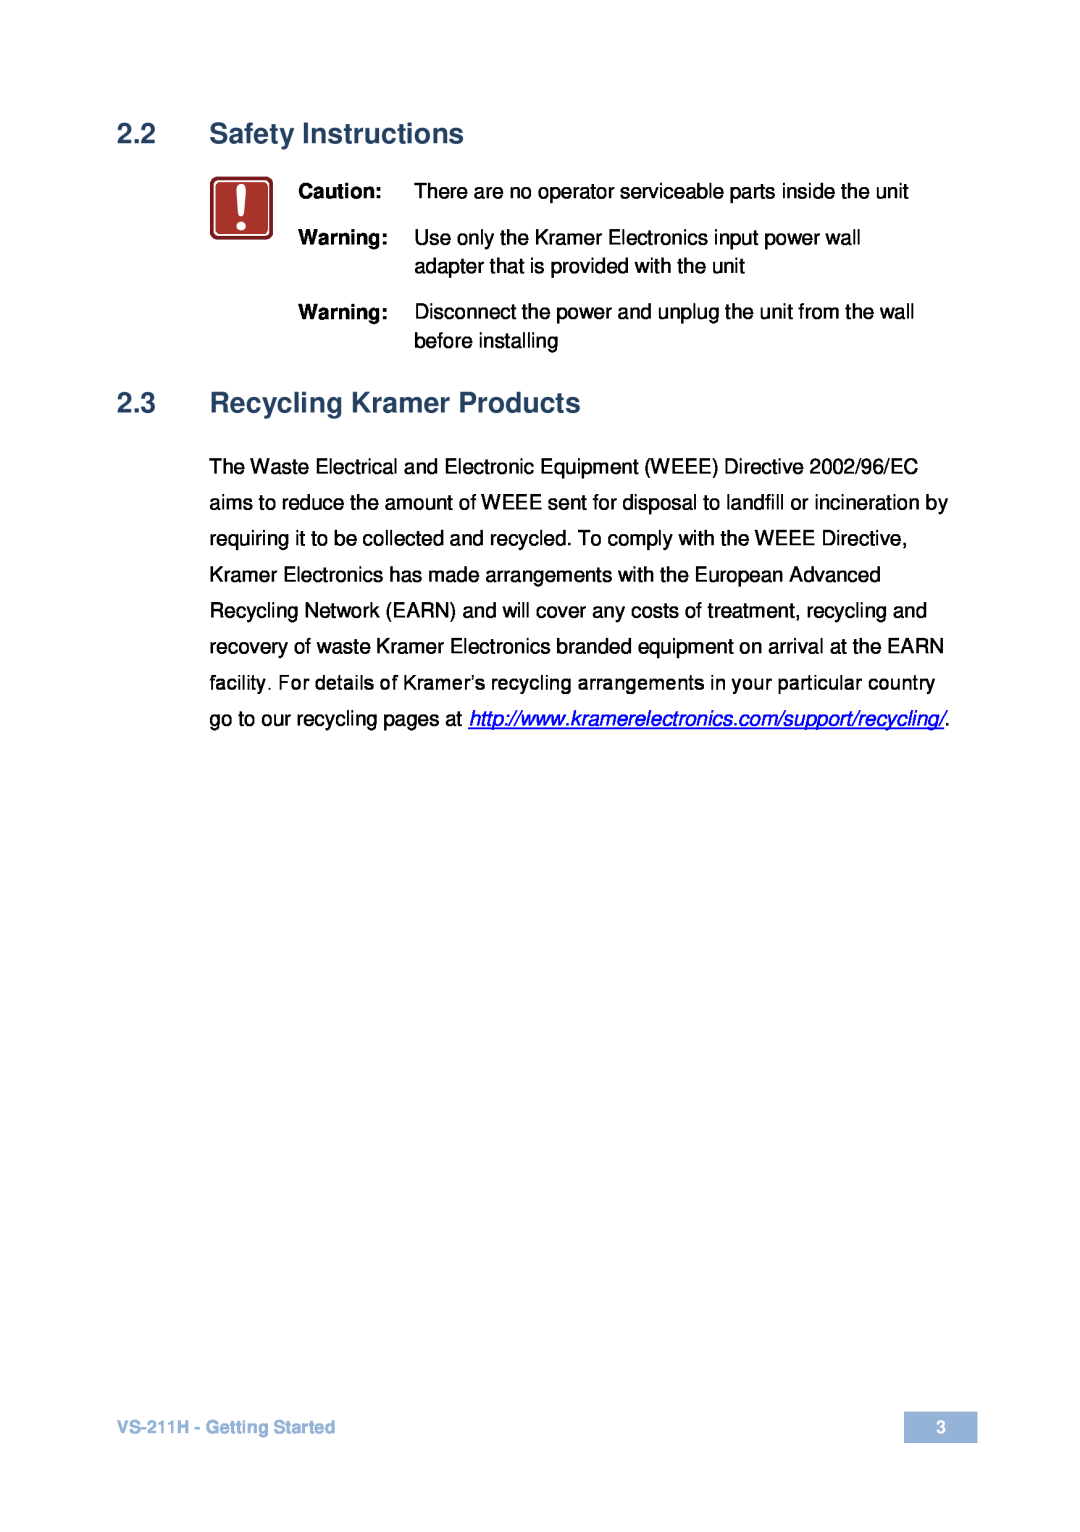 Kramer Electronics VS-211H Safety Instructions, Recycling Kramer Products, adapter that is provided with the unit 